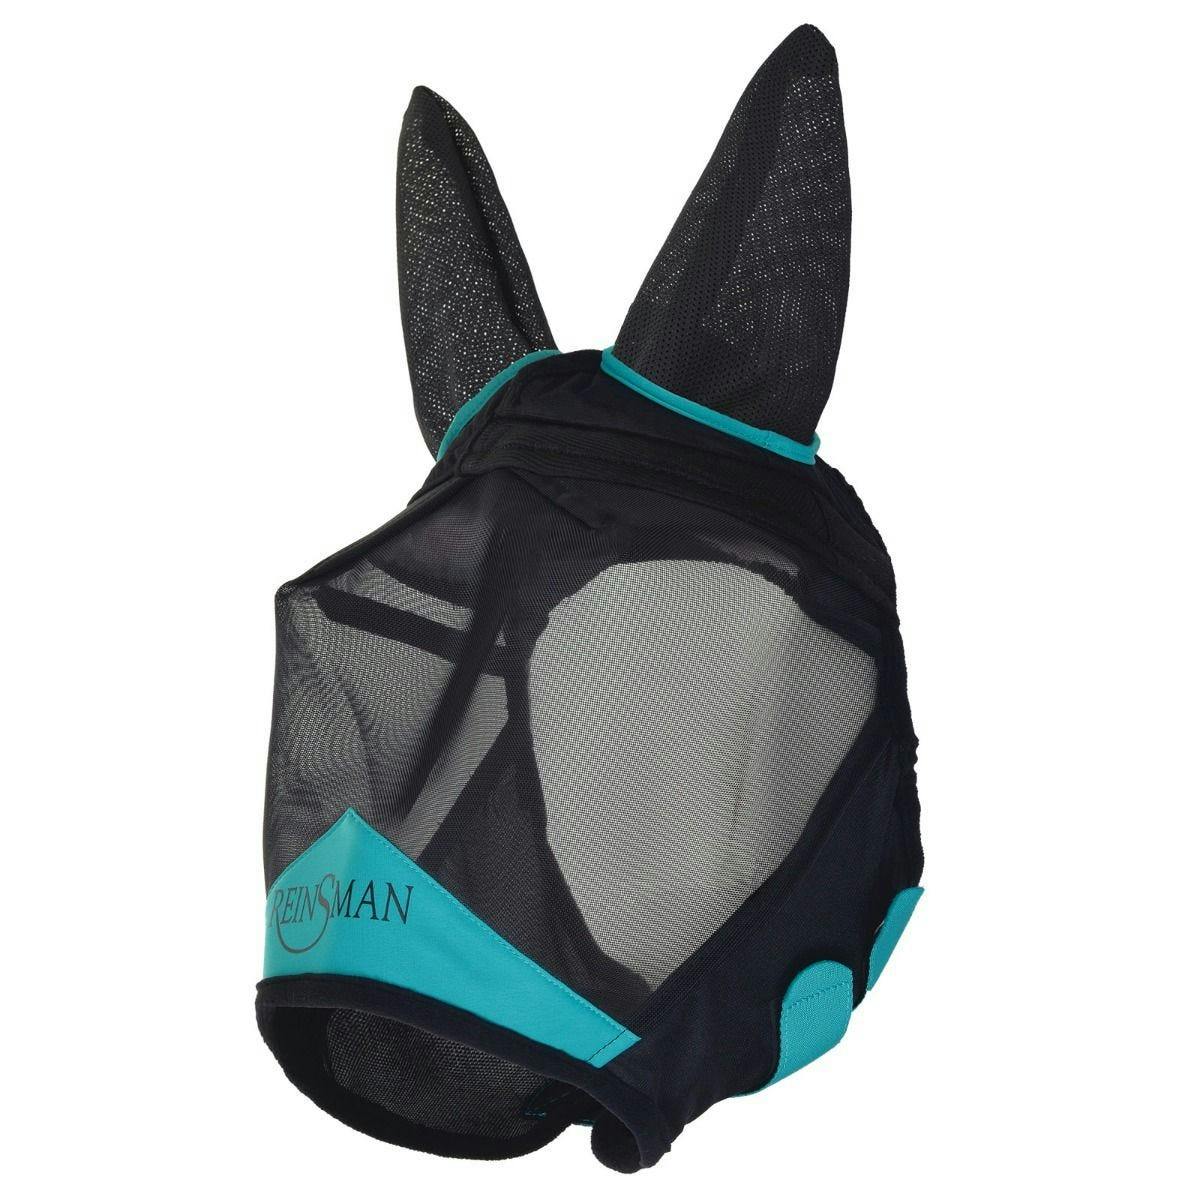 Reinsman Fly Mask With Ears